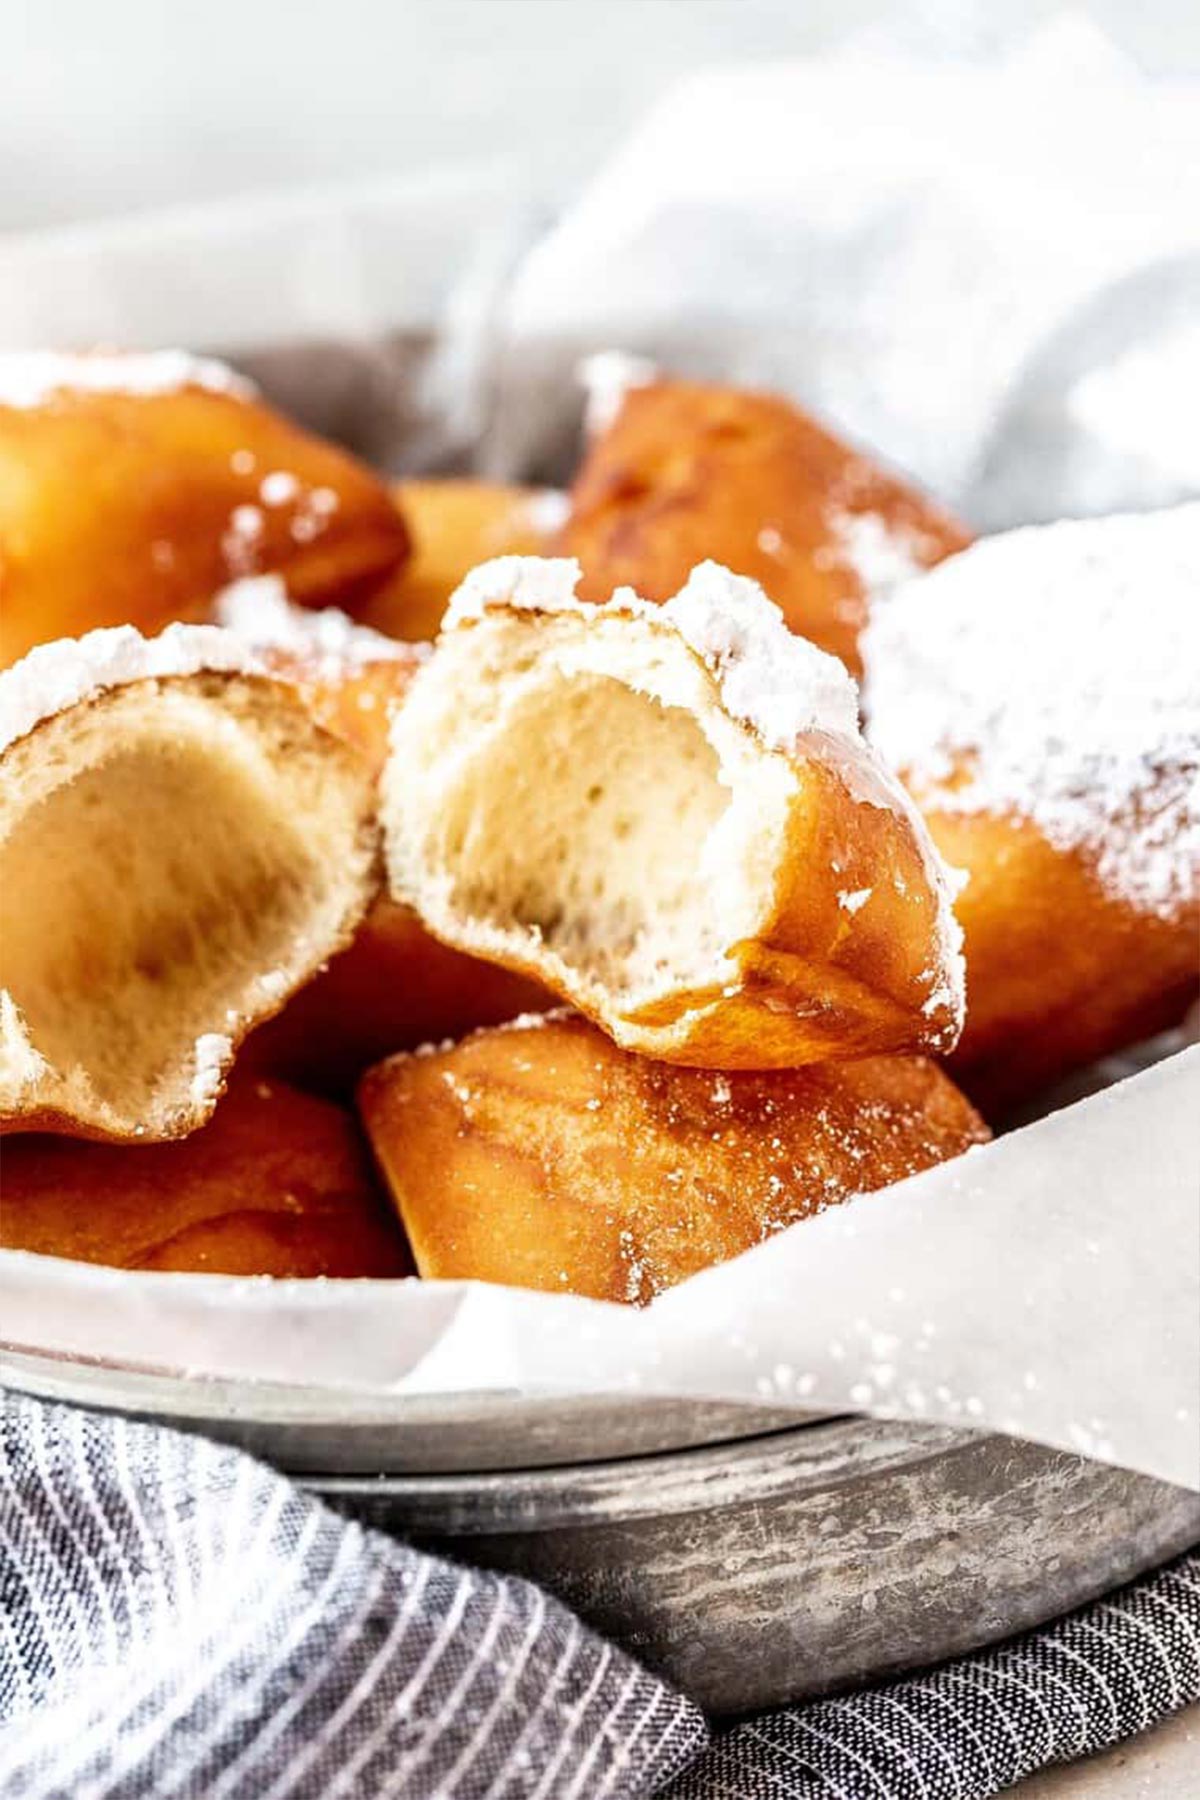 A close up of New Orleans beignets with one broken apart to show inside.